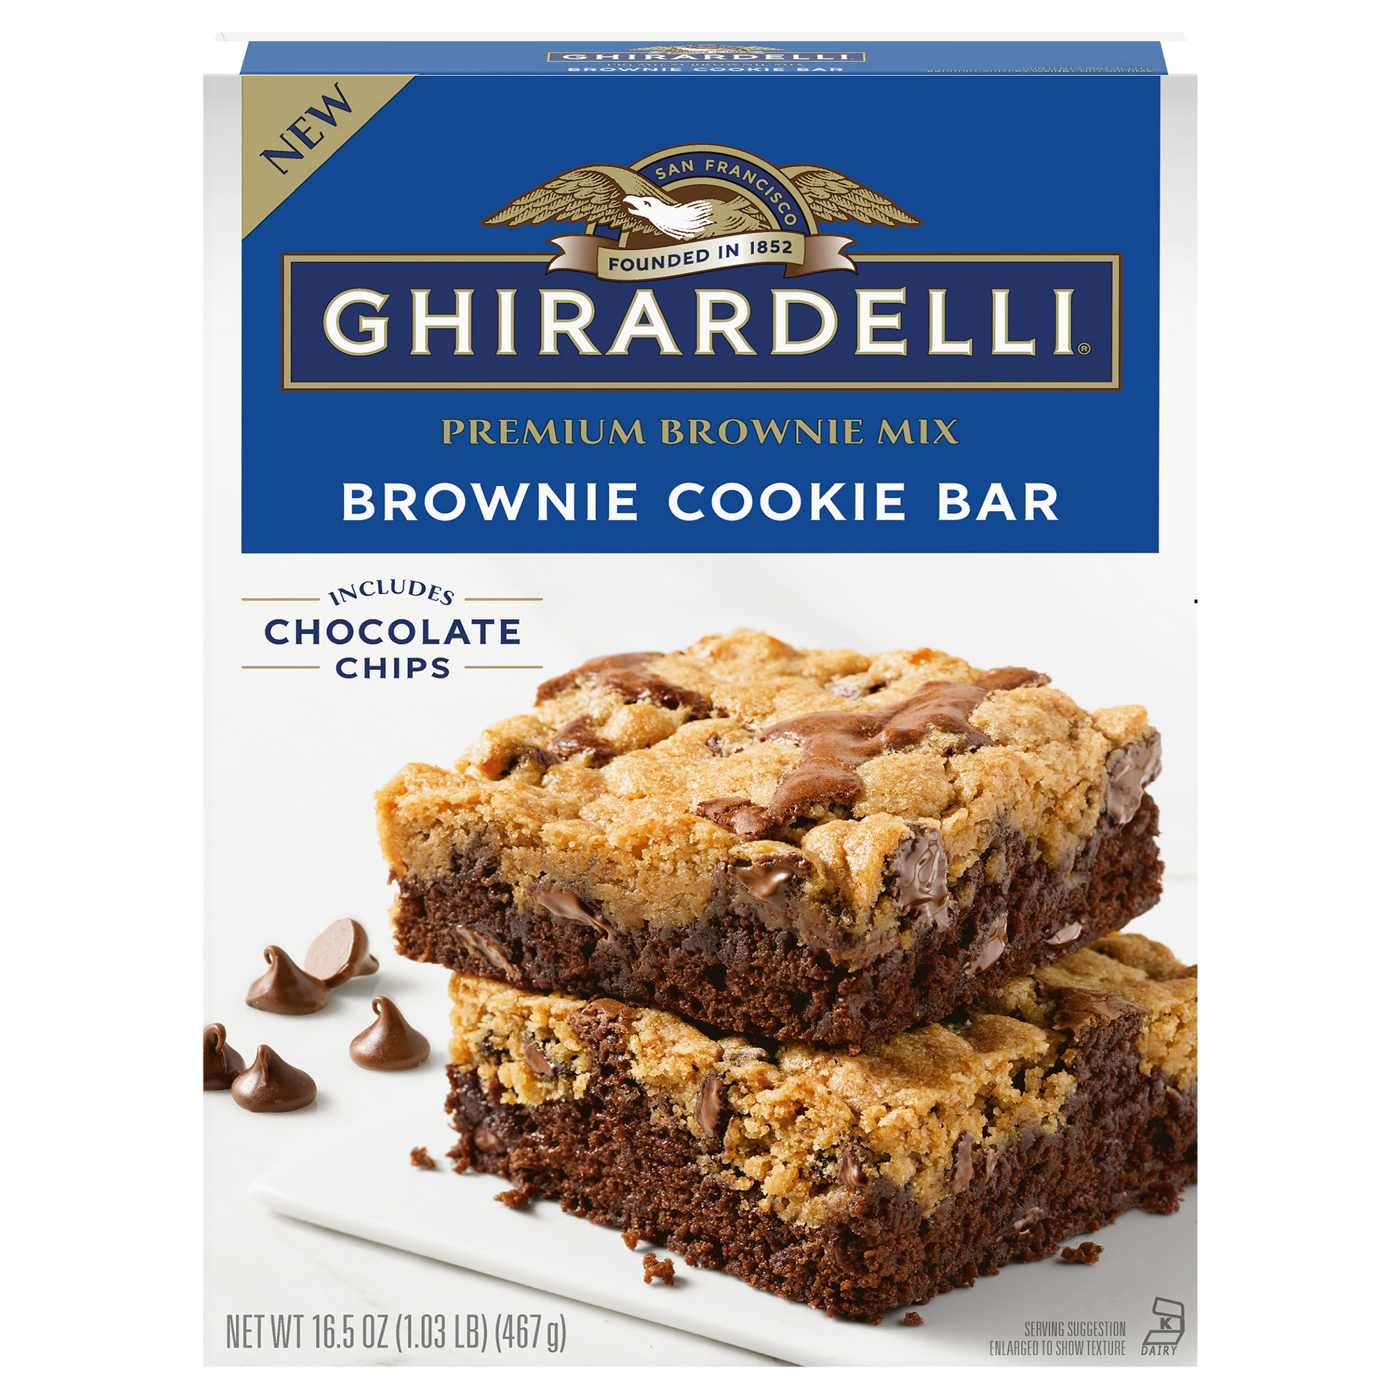 Ghirardelli Brownie Cookie Bar Mix; image 1 of 2